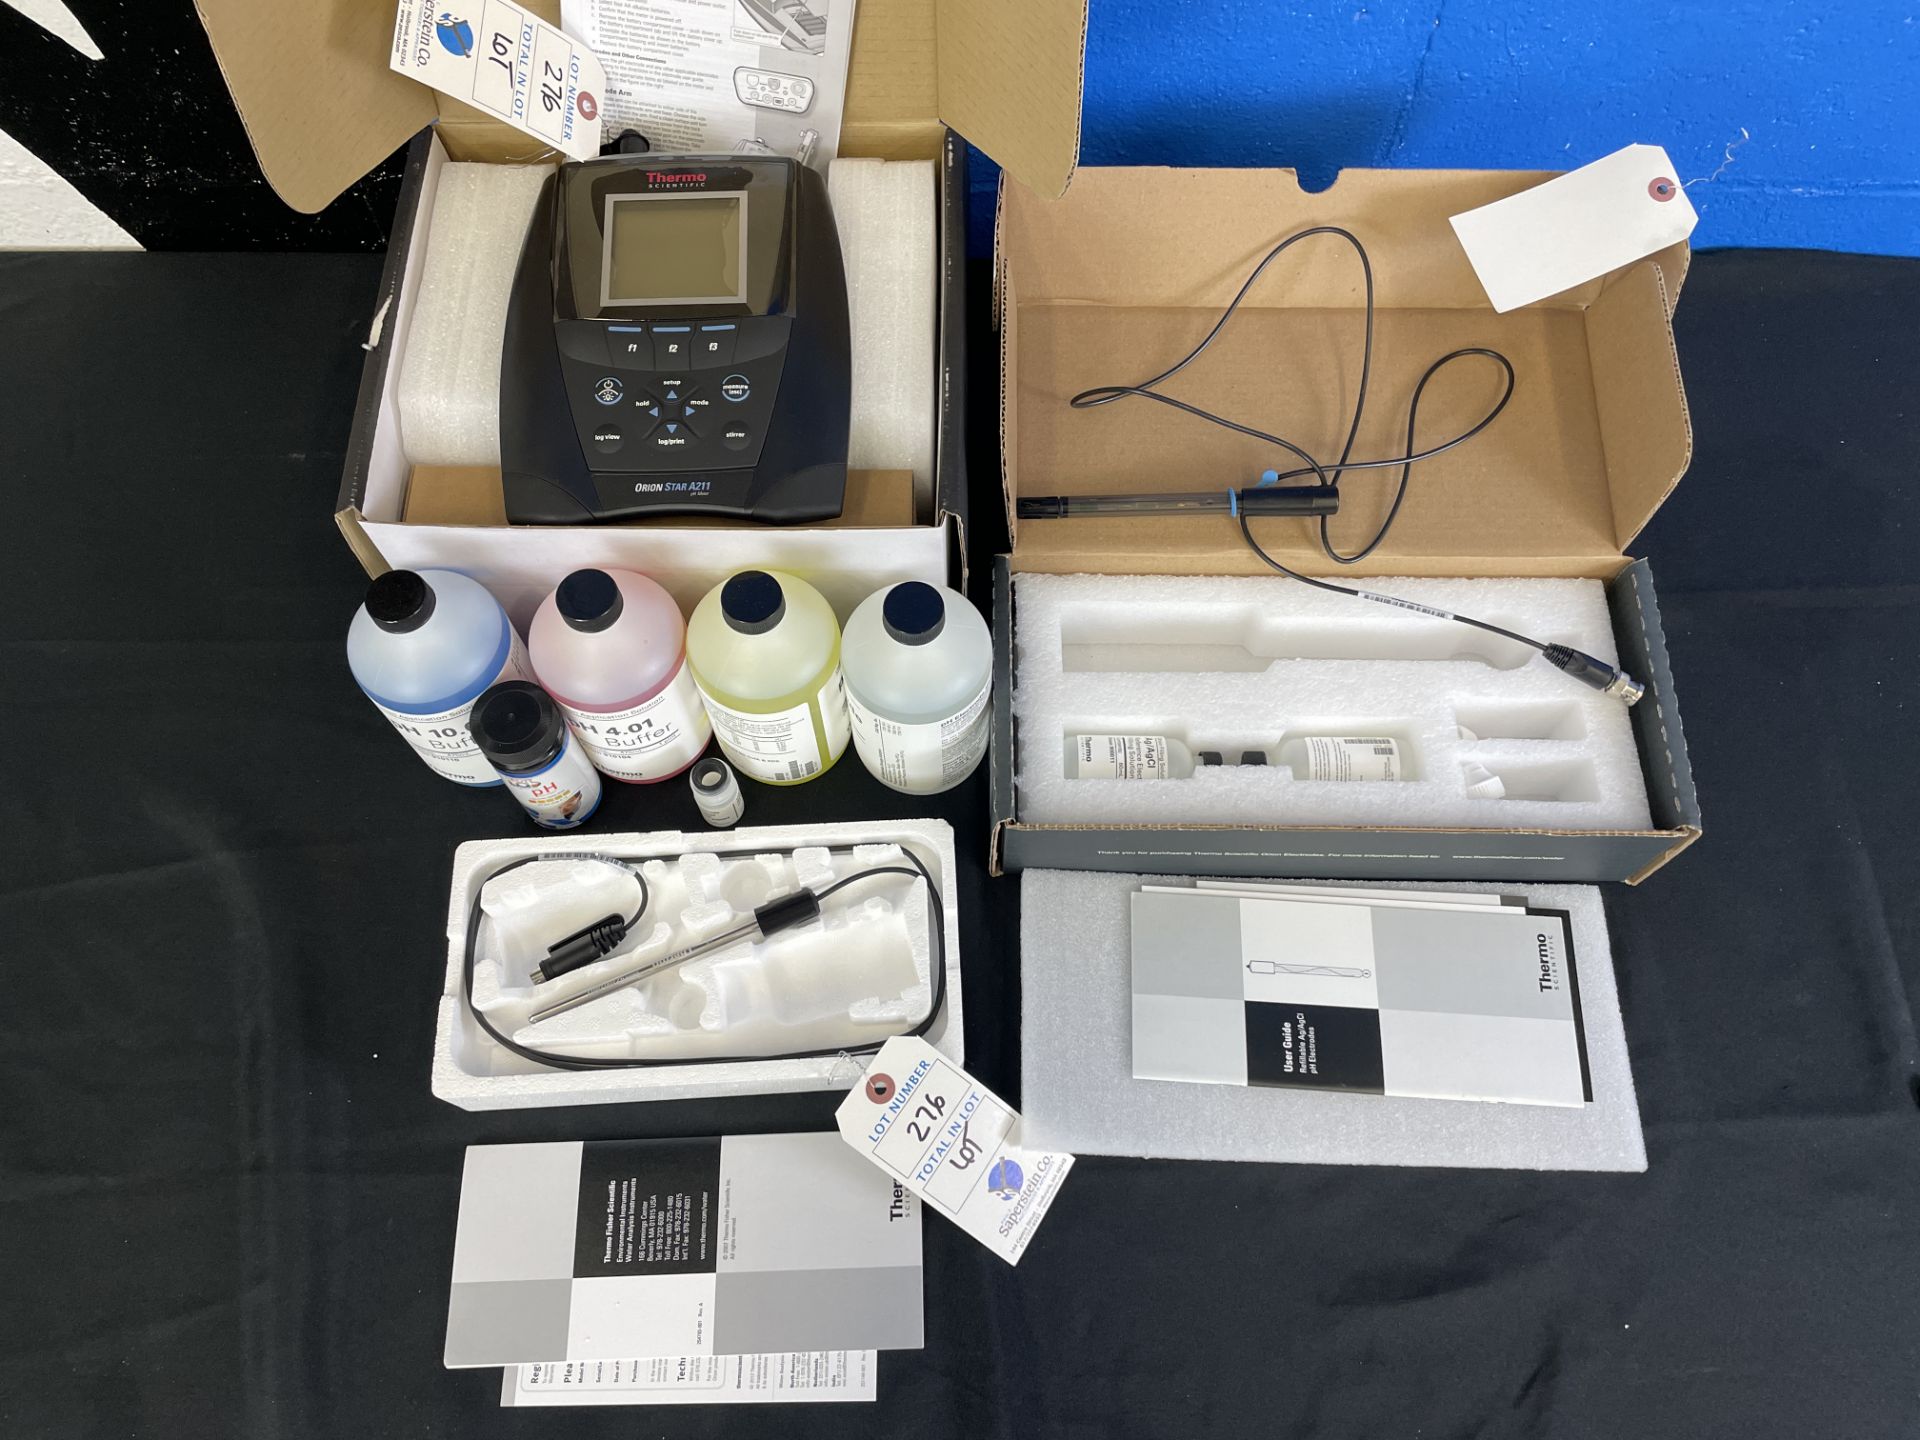 NIB Thermo Scientific #OrionStar A211 PH Meter w/ Epoxy Body Electrode and 8 Pin Probe - Image 5 of 5